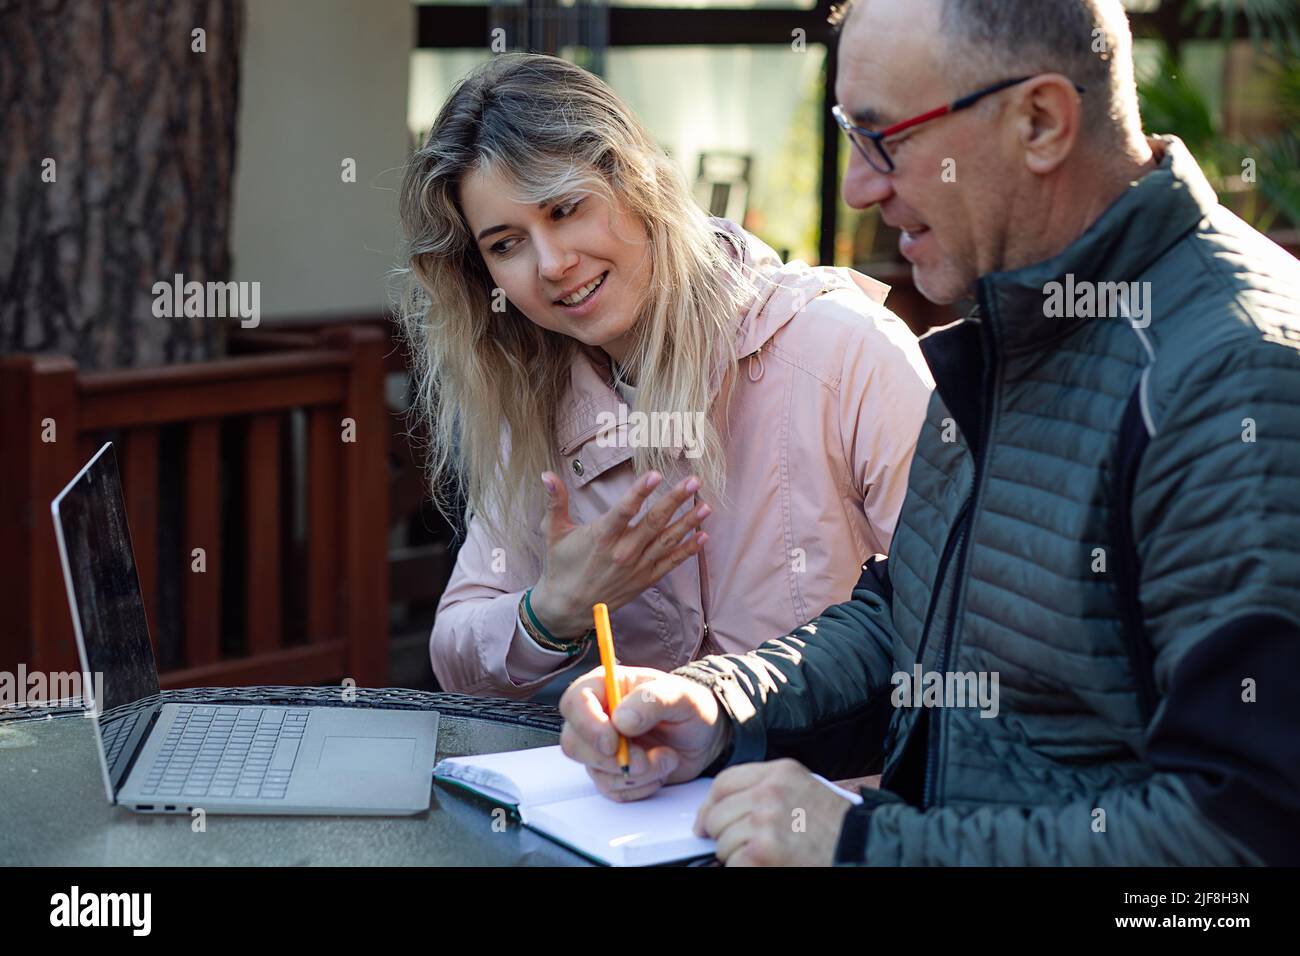 Portrait of young smiling woman daughter trainer talking to middle-aged man, explaining information on screen of laptop. Stock Photo